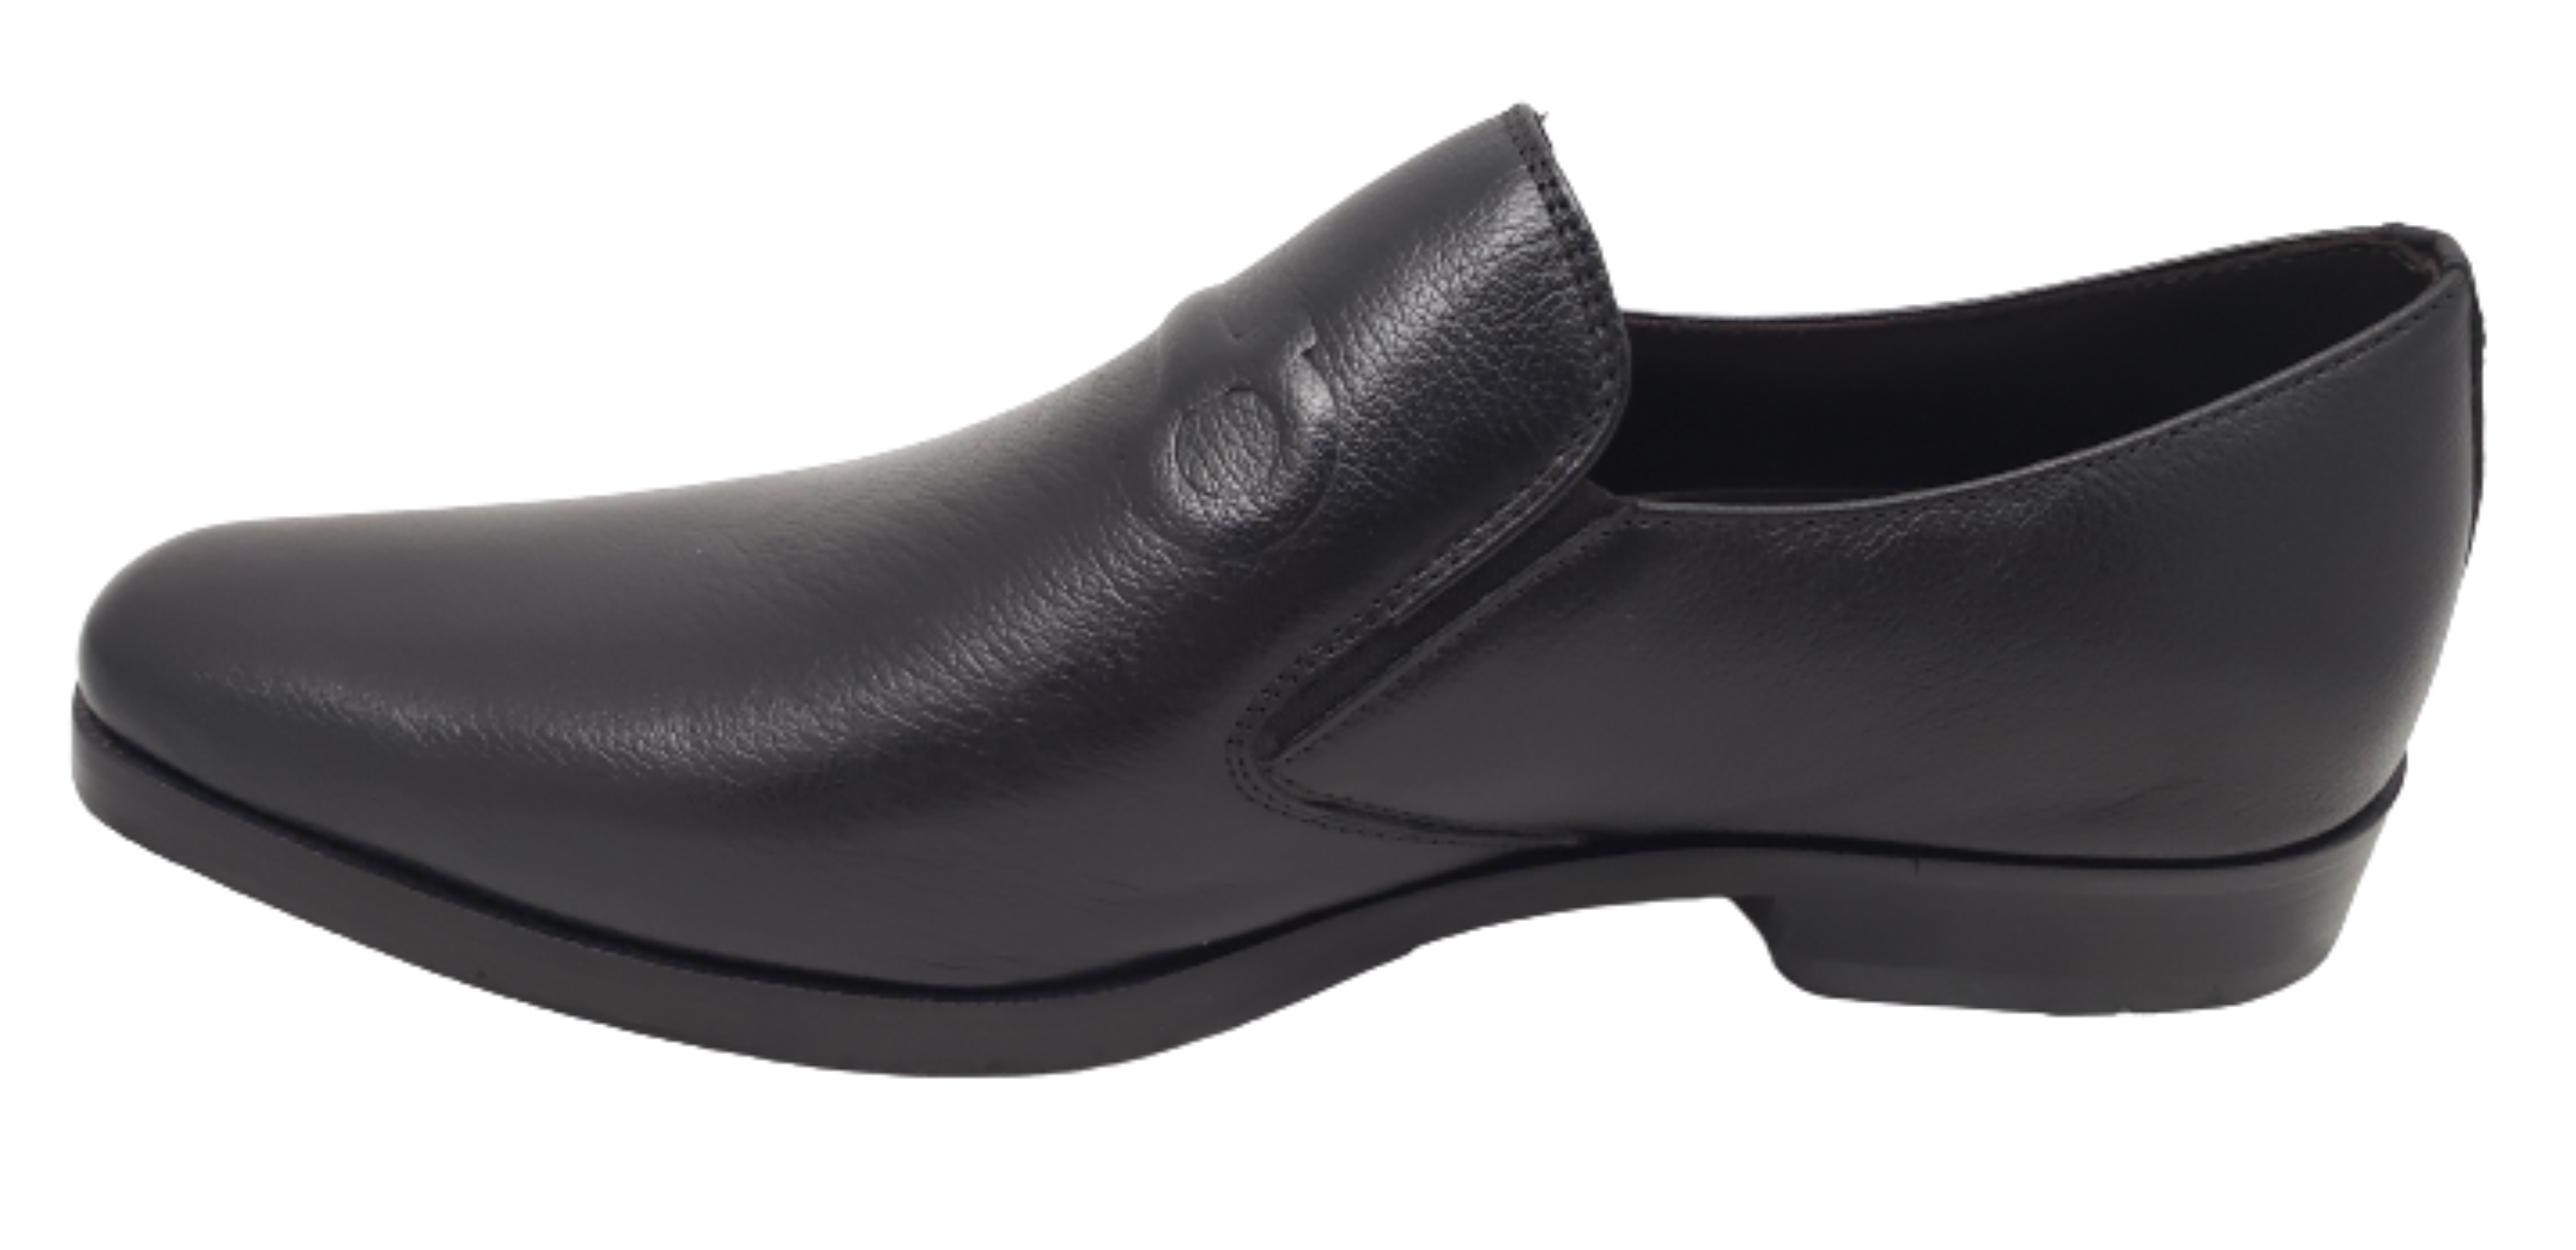 ALFREDO MEN'S BLACK DRESS SLIP ON SHOES WITH LEATHER SOLE 3512